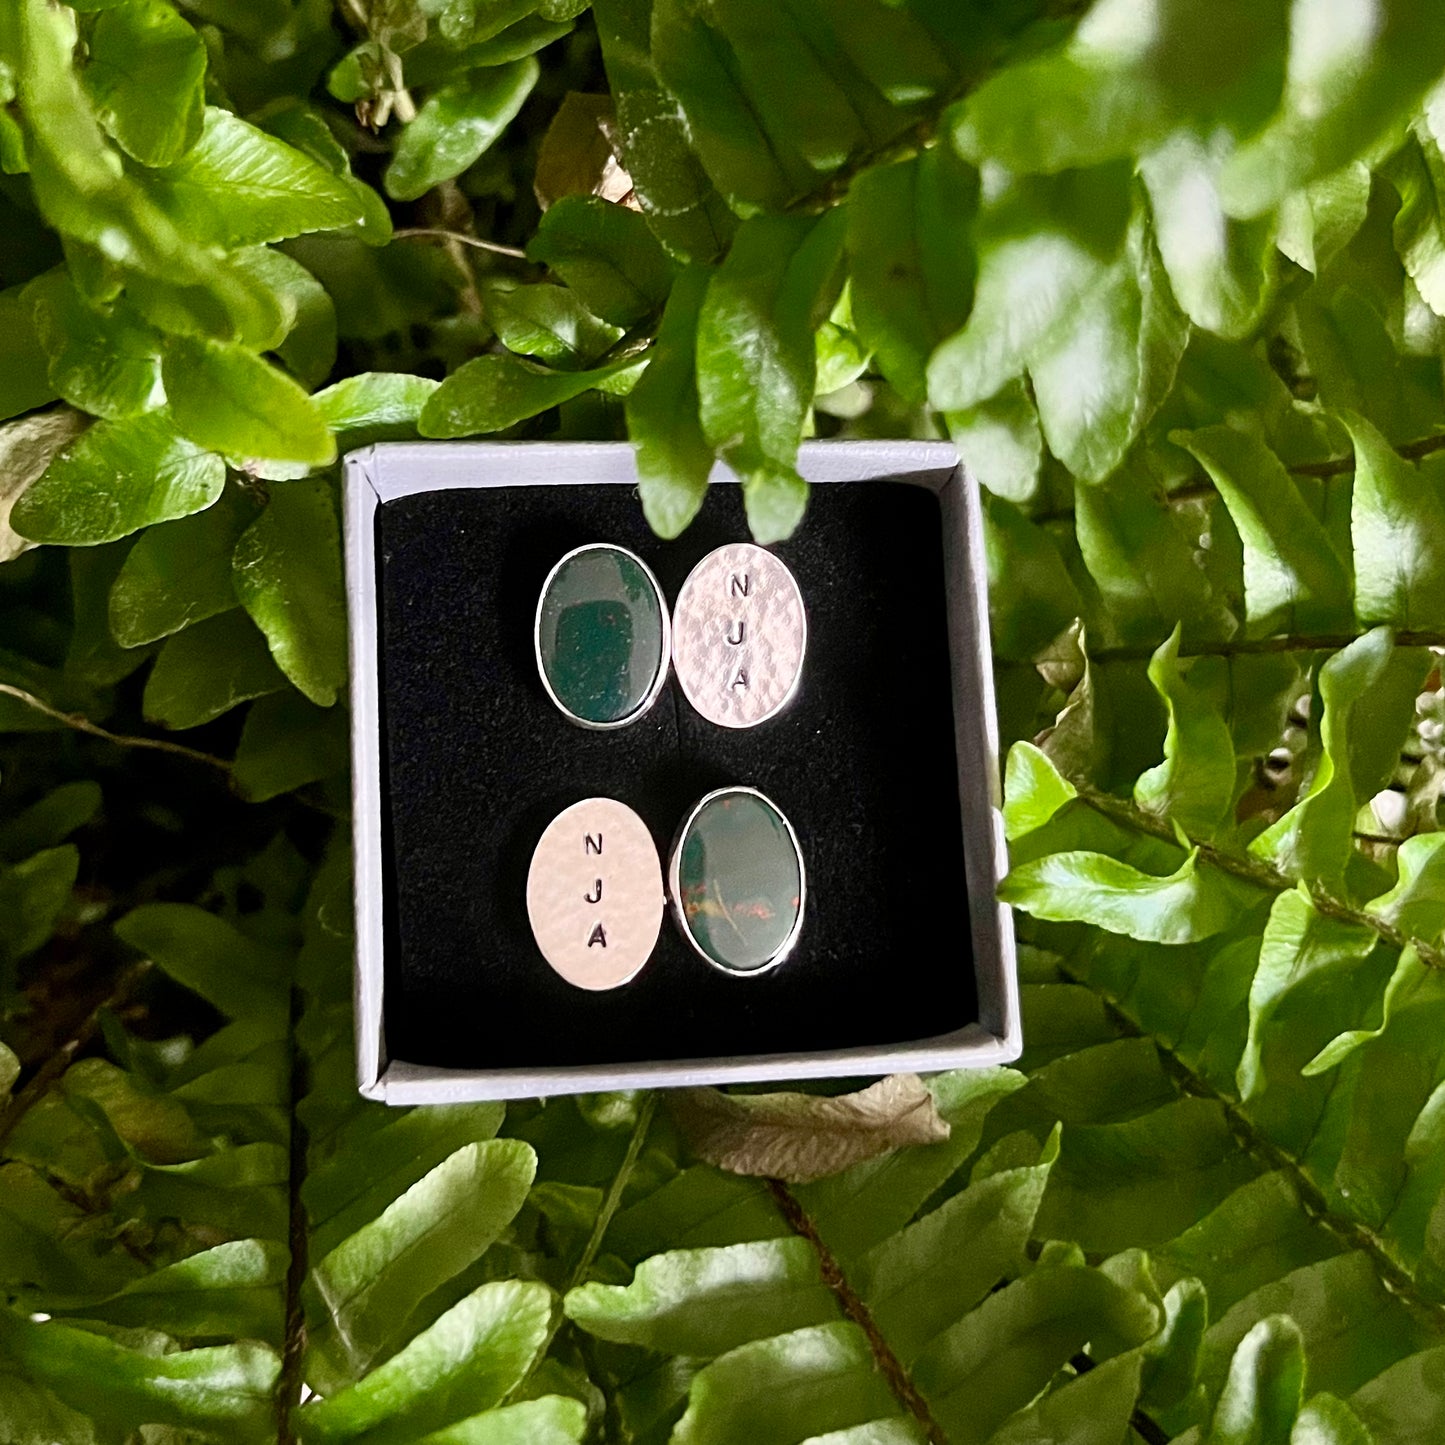 Personalised bloodstone & sterling silver cufflinks on a leafy background.